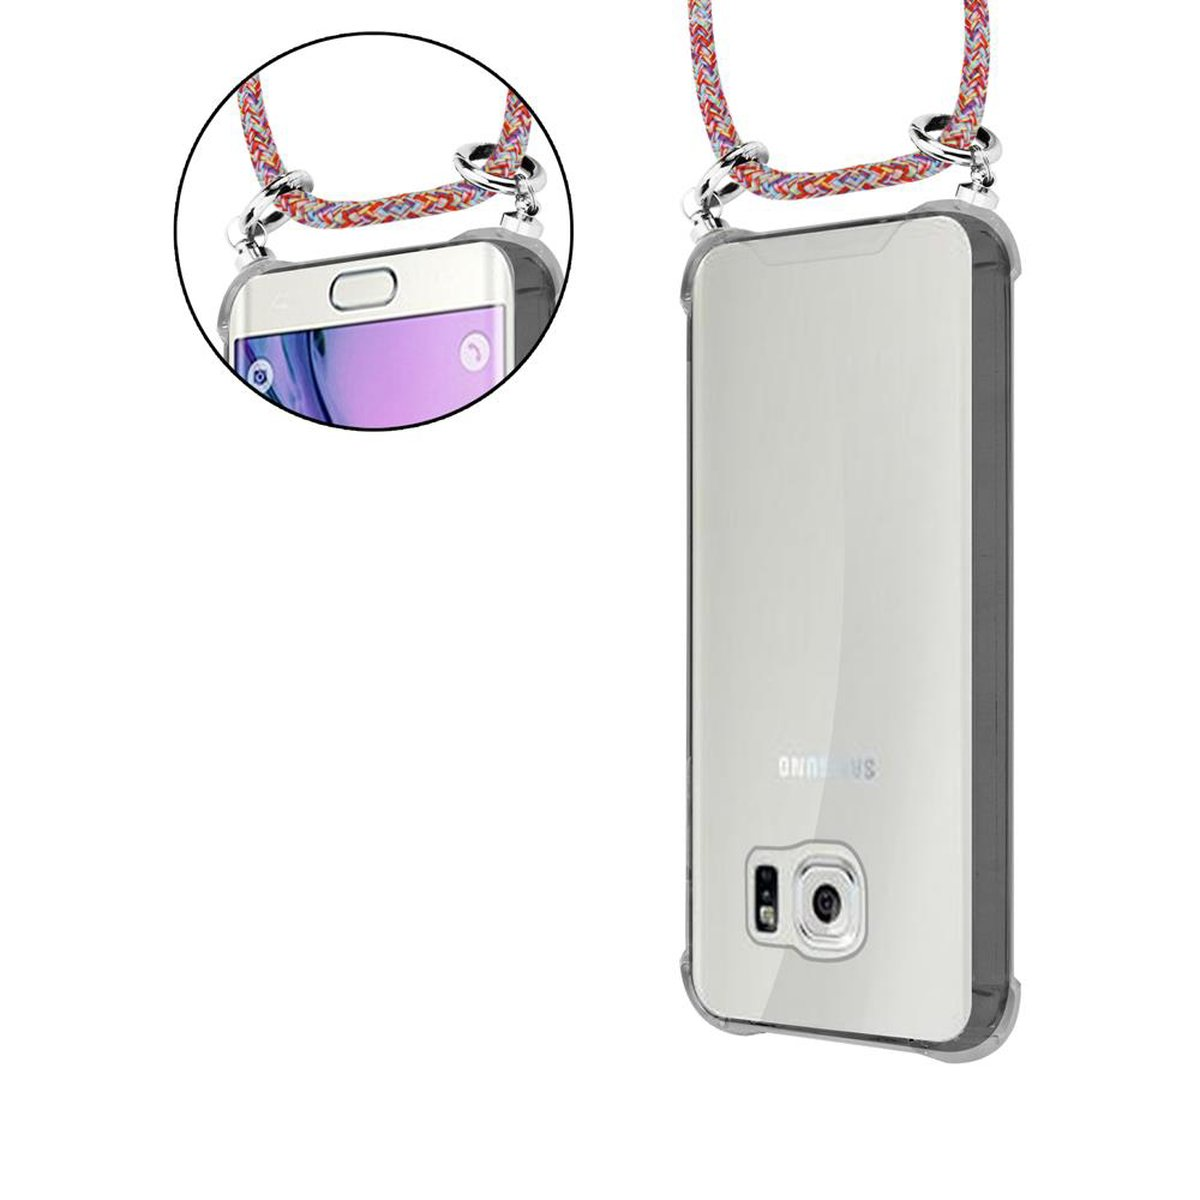 PARROT Silber Ringen, Kette COLORFUL Kordel CADORABO mit S6, Hülle, und Galaxy Handy abnehmbarer Backcover, Samsung, Band